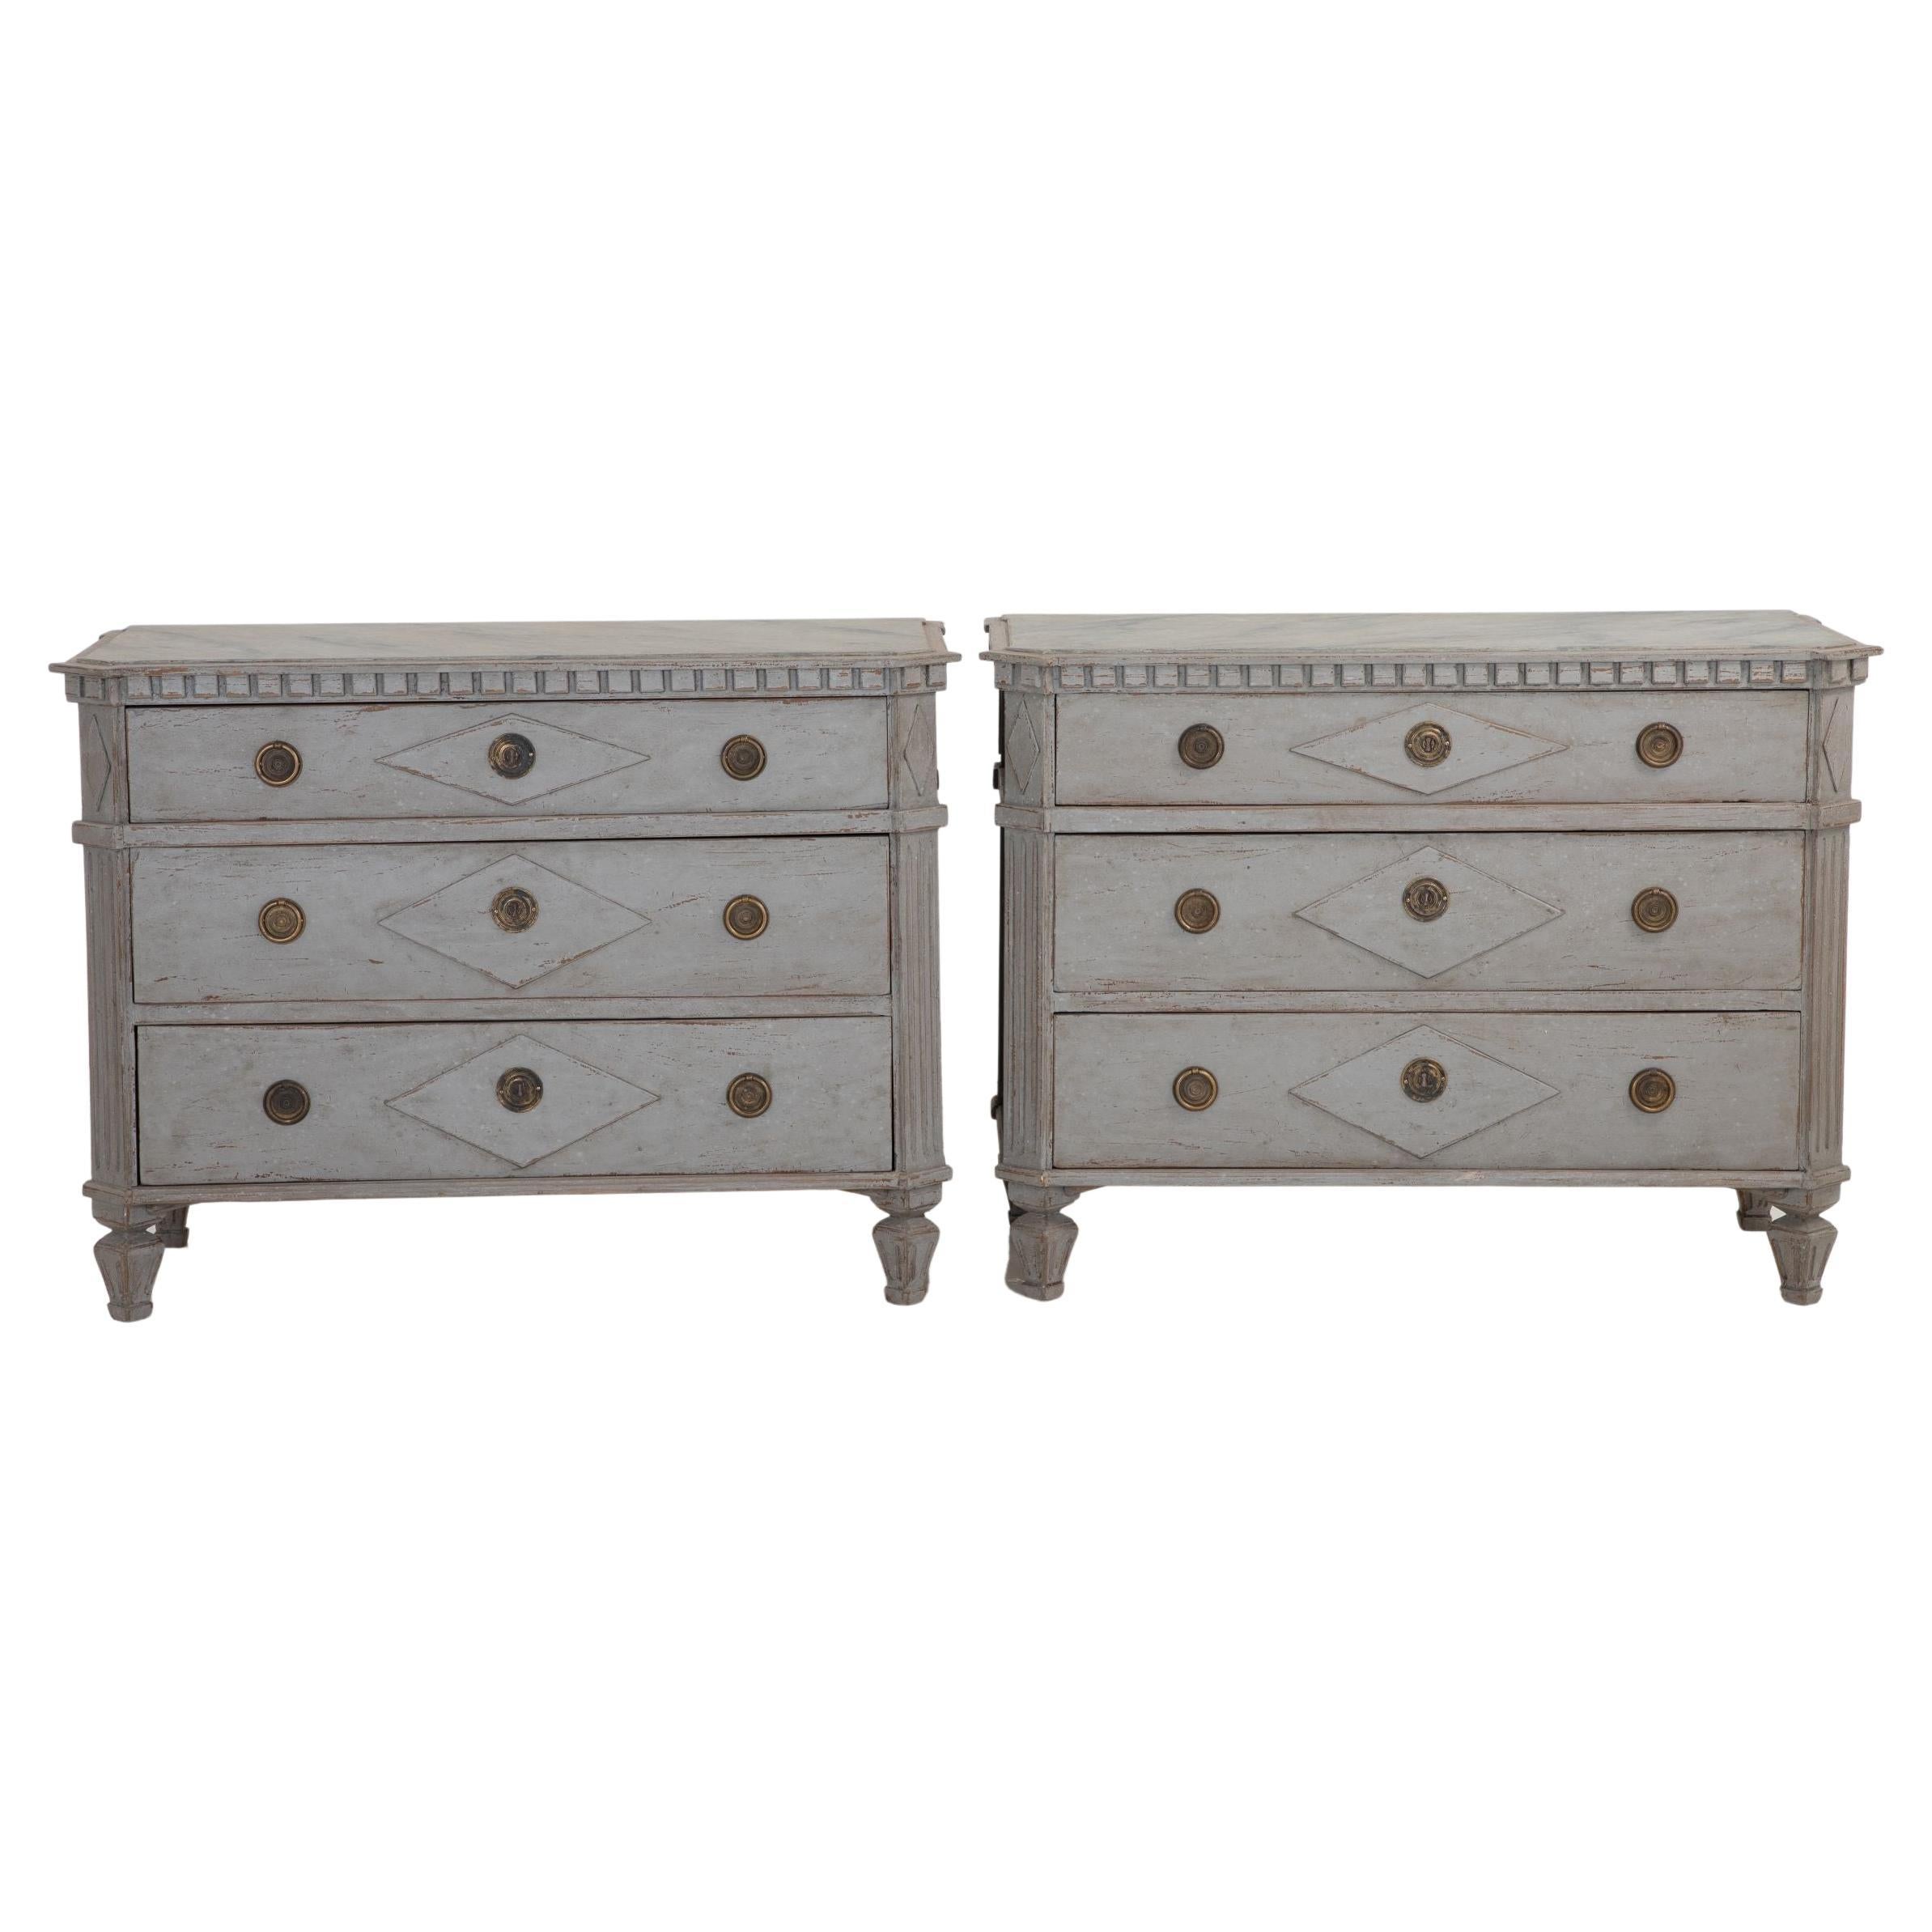 Pair Gustavian Style Chests of Drawers